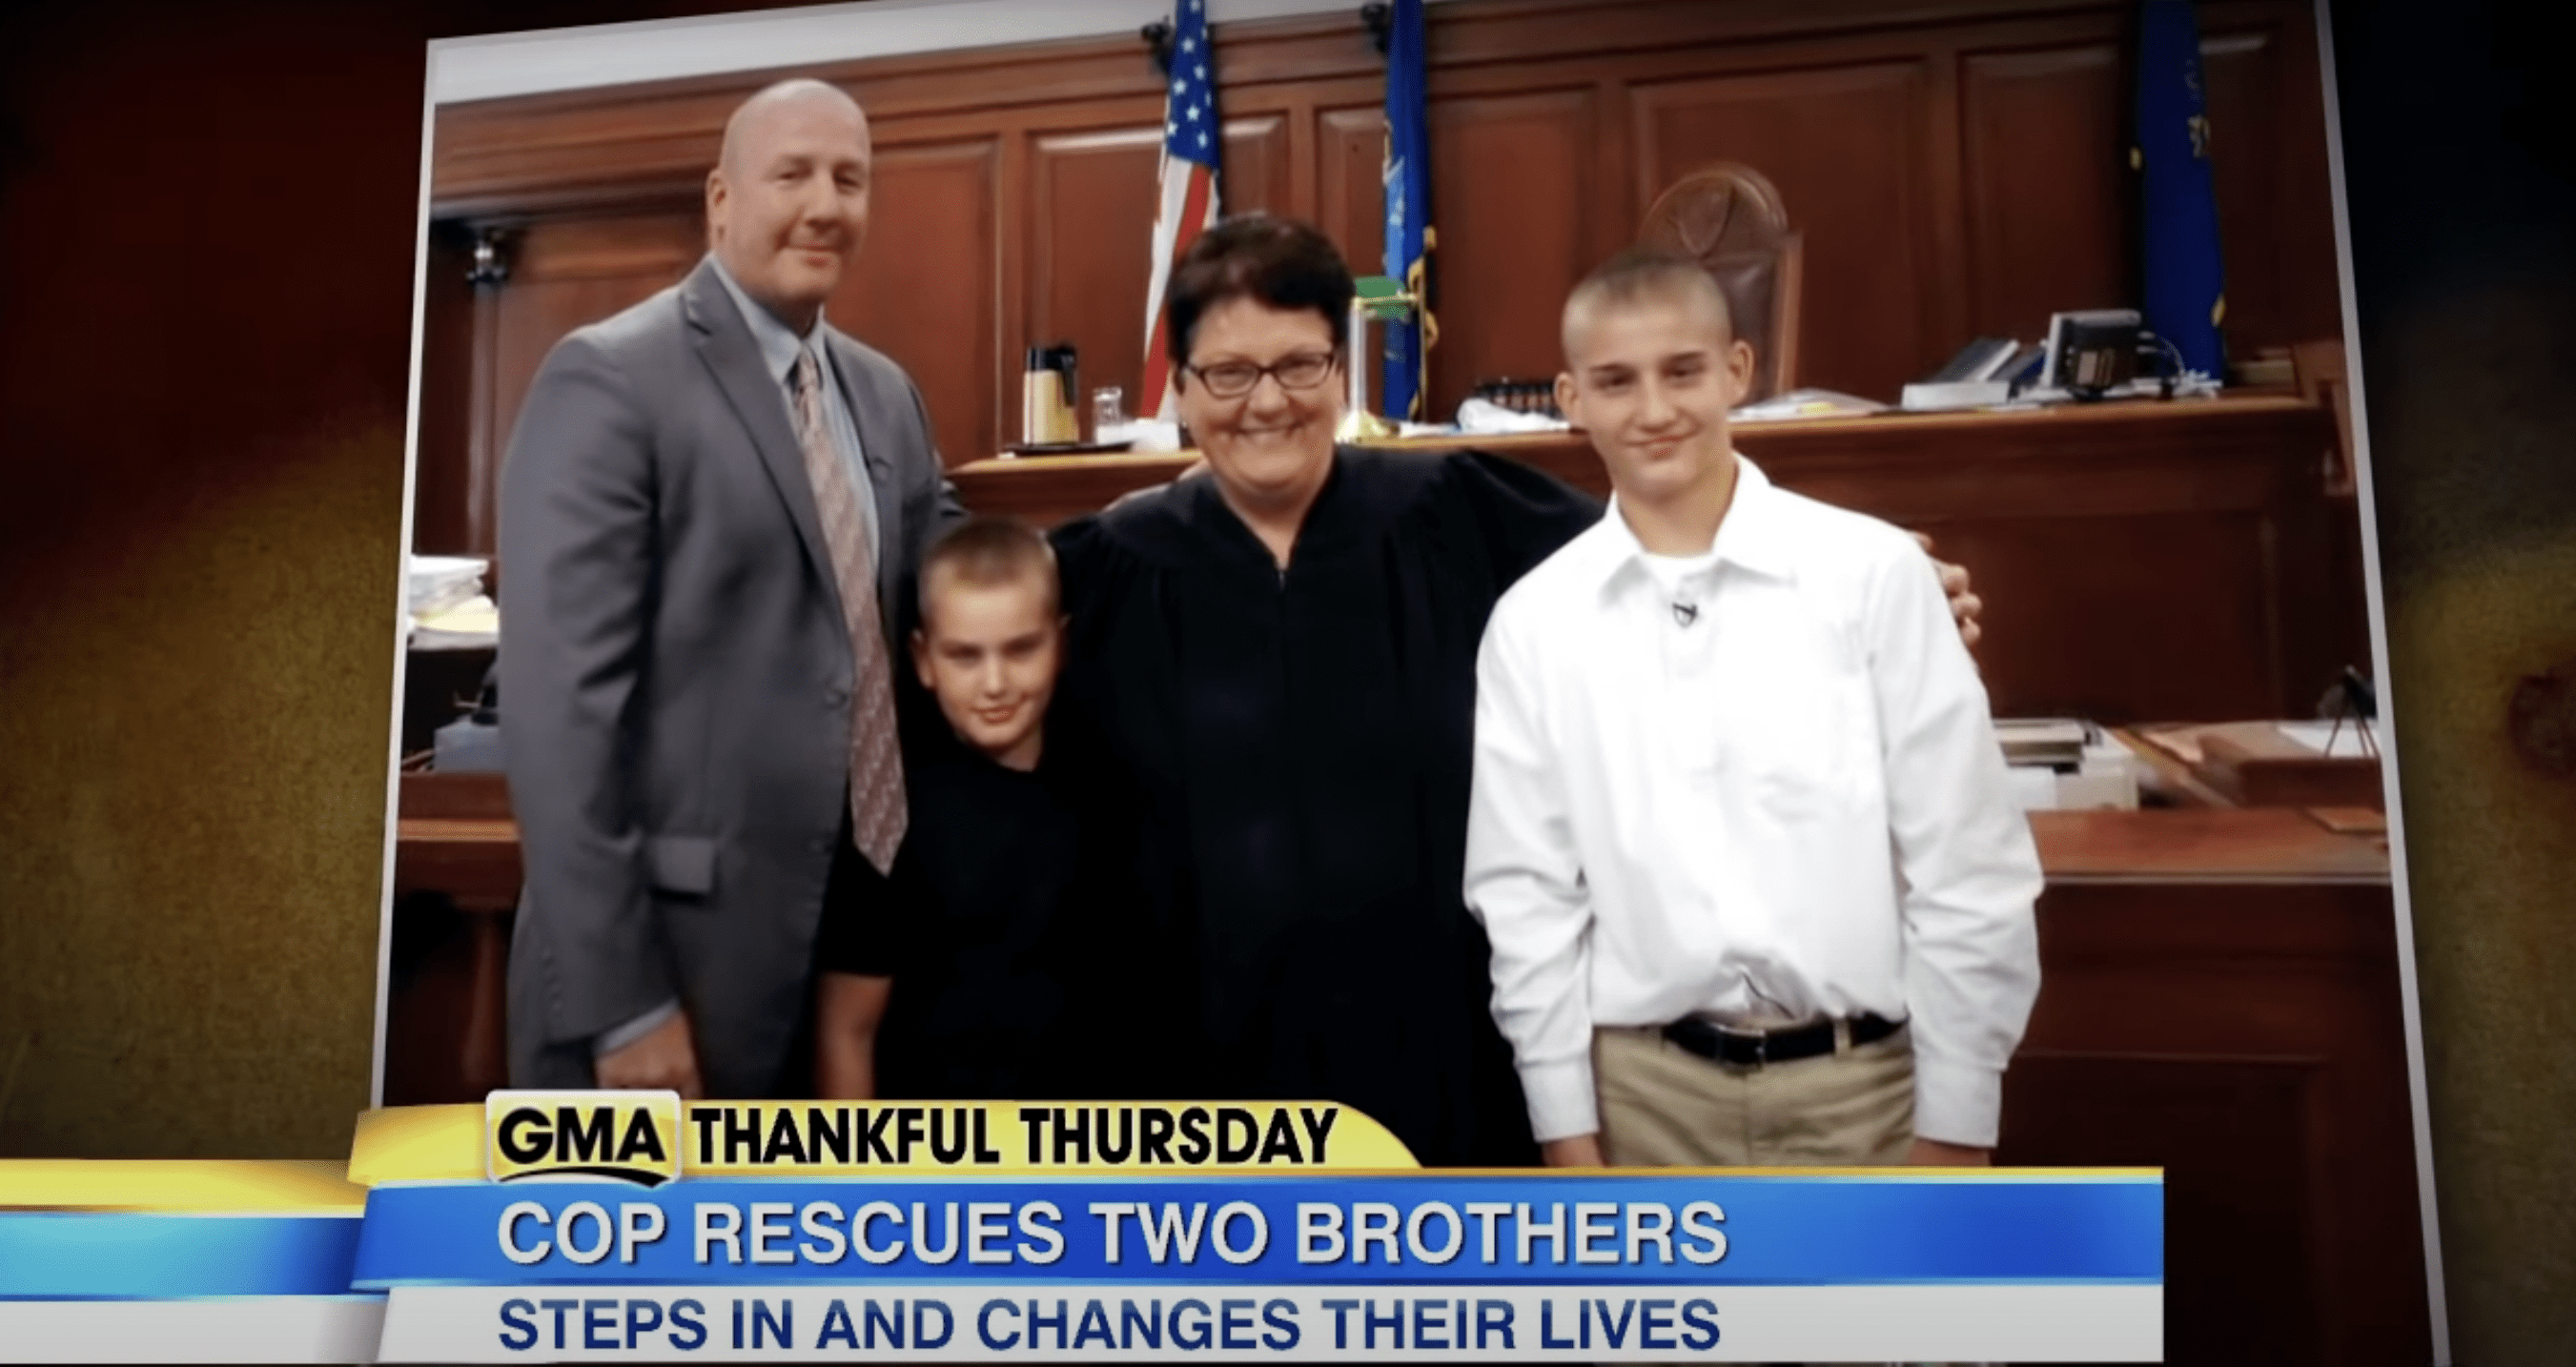 [Left to Right] Jack Mook, Jesse, Court Judge, and Josh at the official adoption hearing. | Source: youtube.com/ABC News 